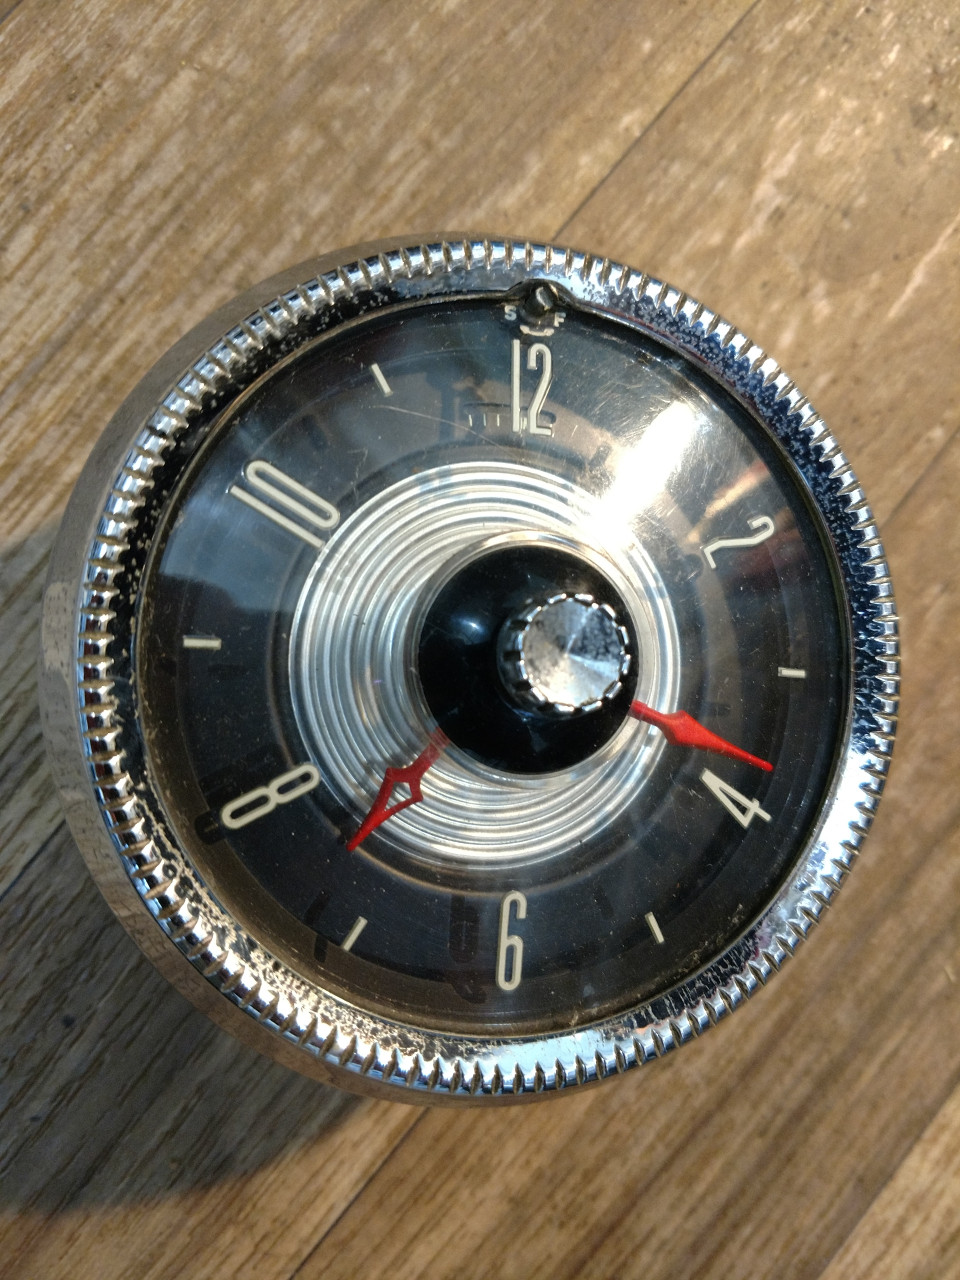 1955 Ford Clock